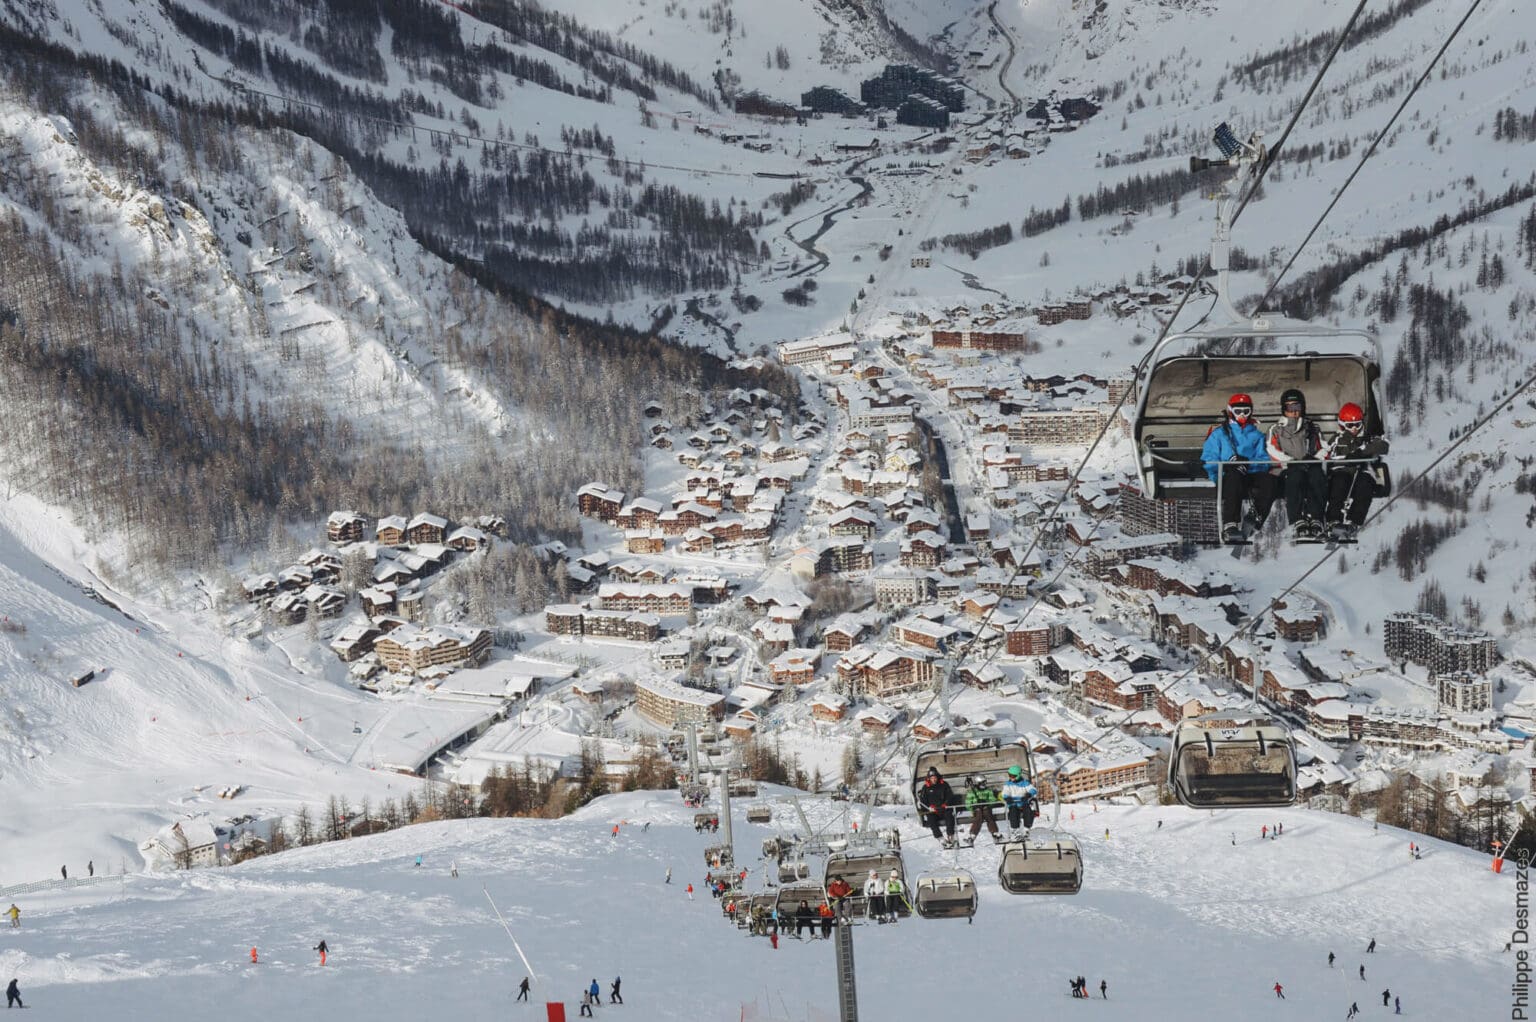 A chair lift up from Val d'Isere